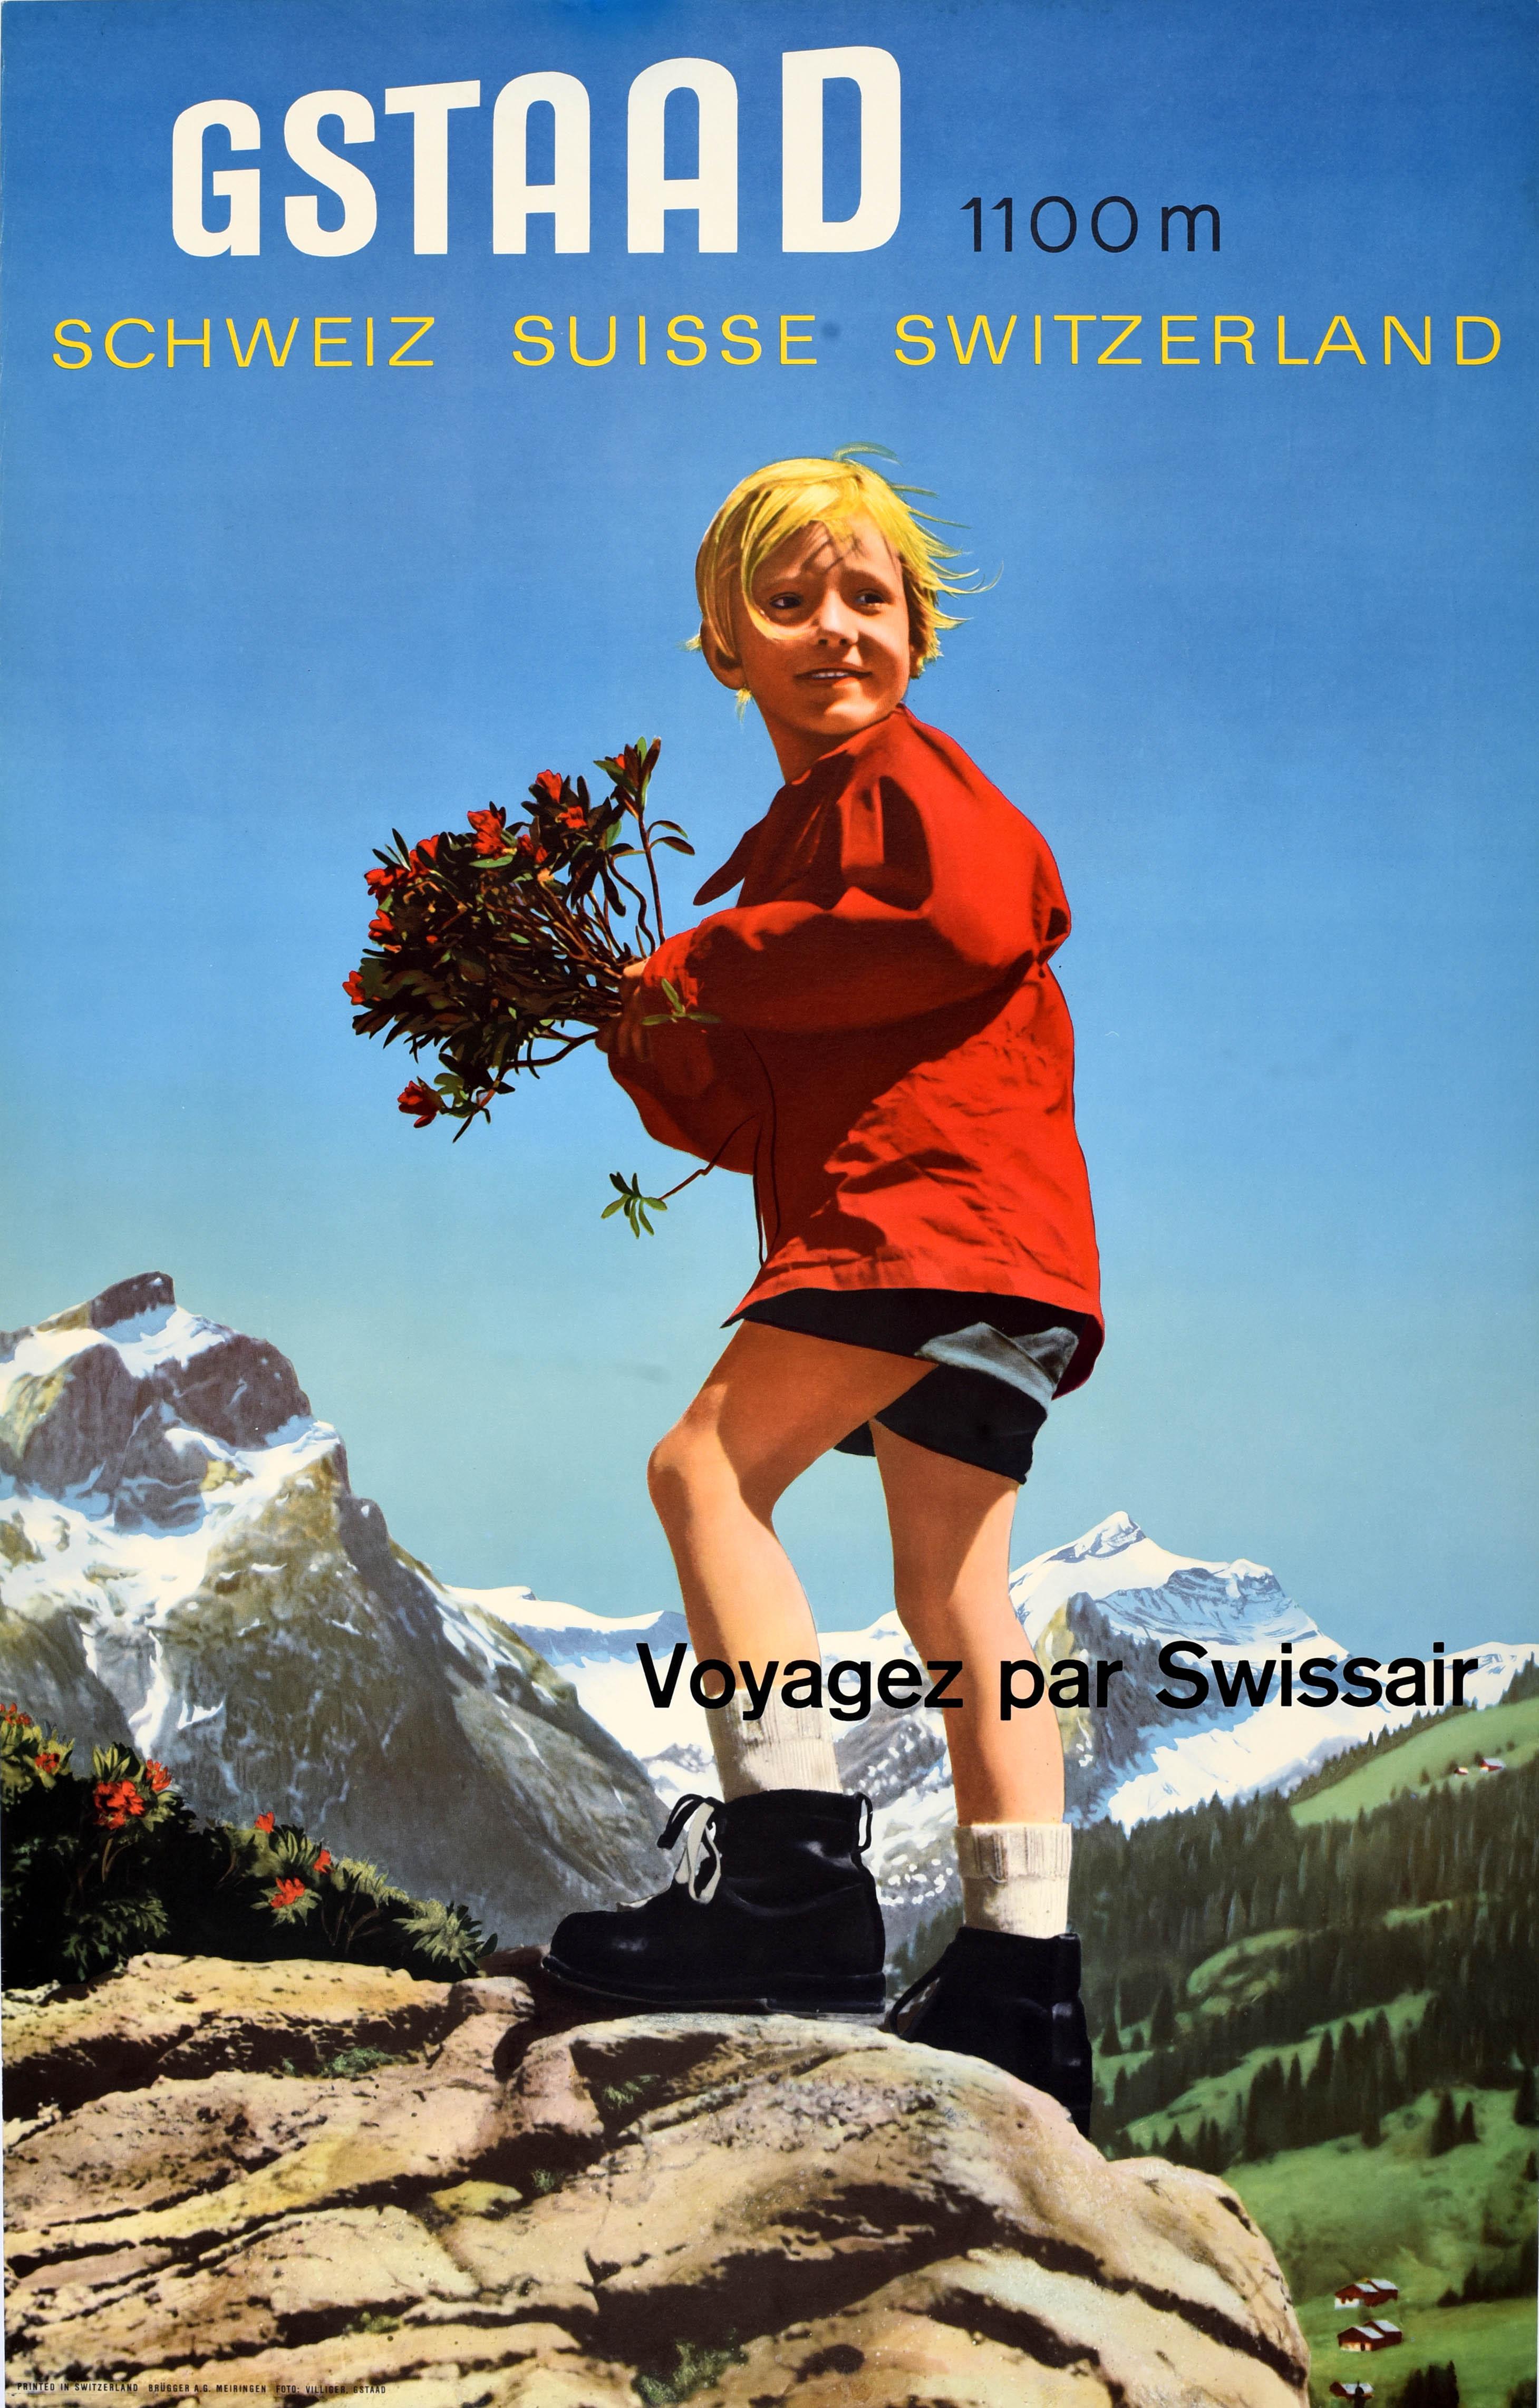 Original vintage travel poster advertising Gstaad 1100m Suisse Schweiz Switzerland Voyagez par Swissair Travel with Swissair featuring a colour photo by Franz Villiger (1918-1992) of a smiling child wearing a red top, shorts and hiking boots and